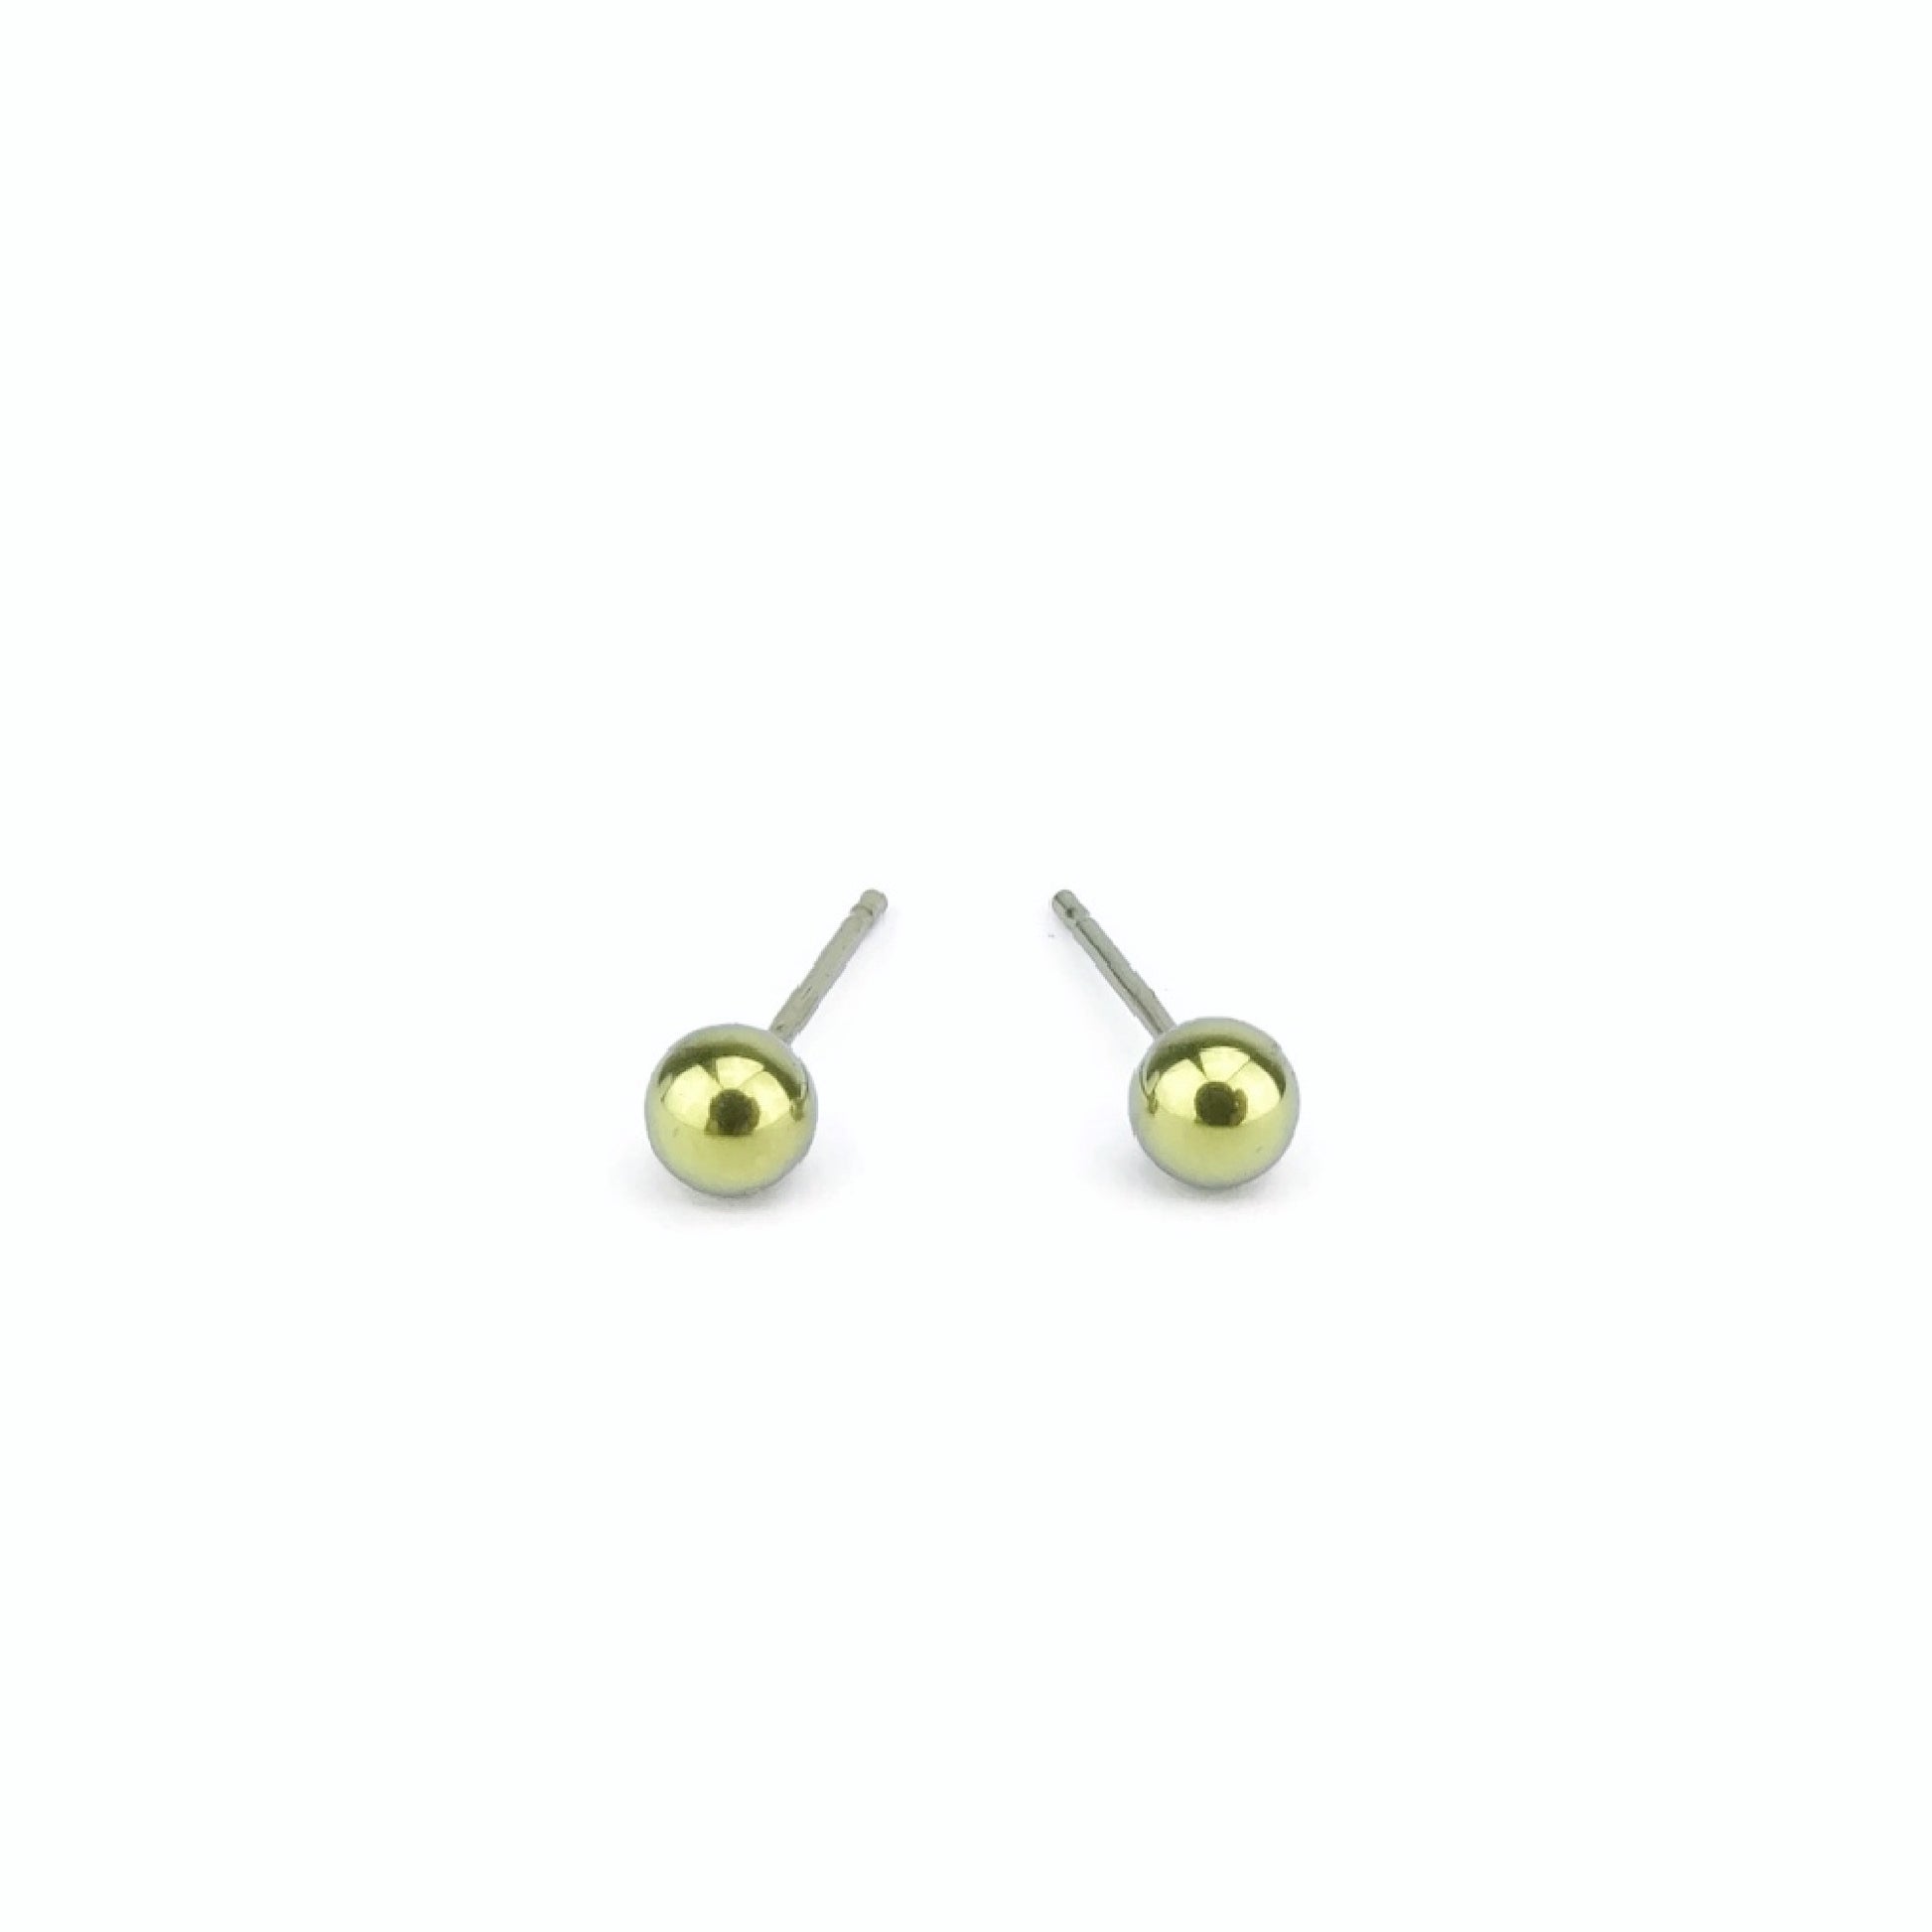 Yellow Gold Ball Stud Earrings | 4mm | REEDS Jewelers